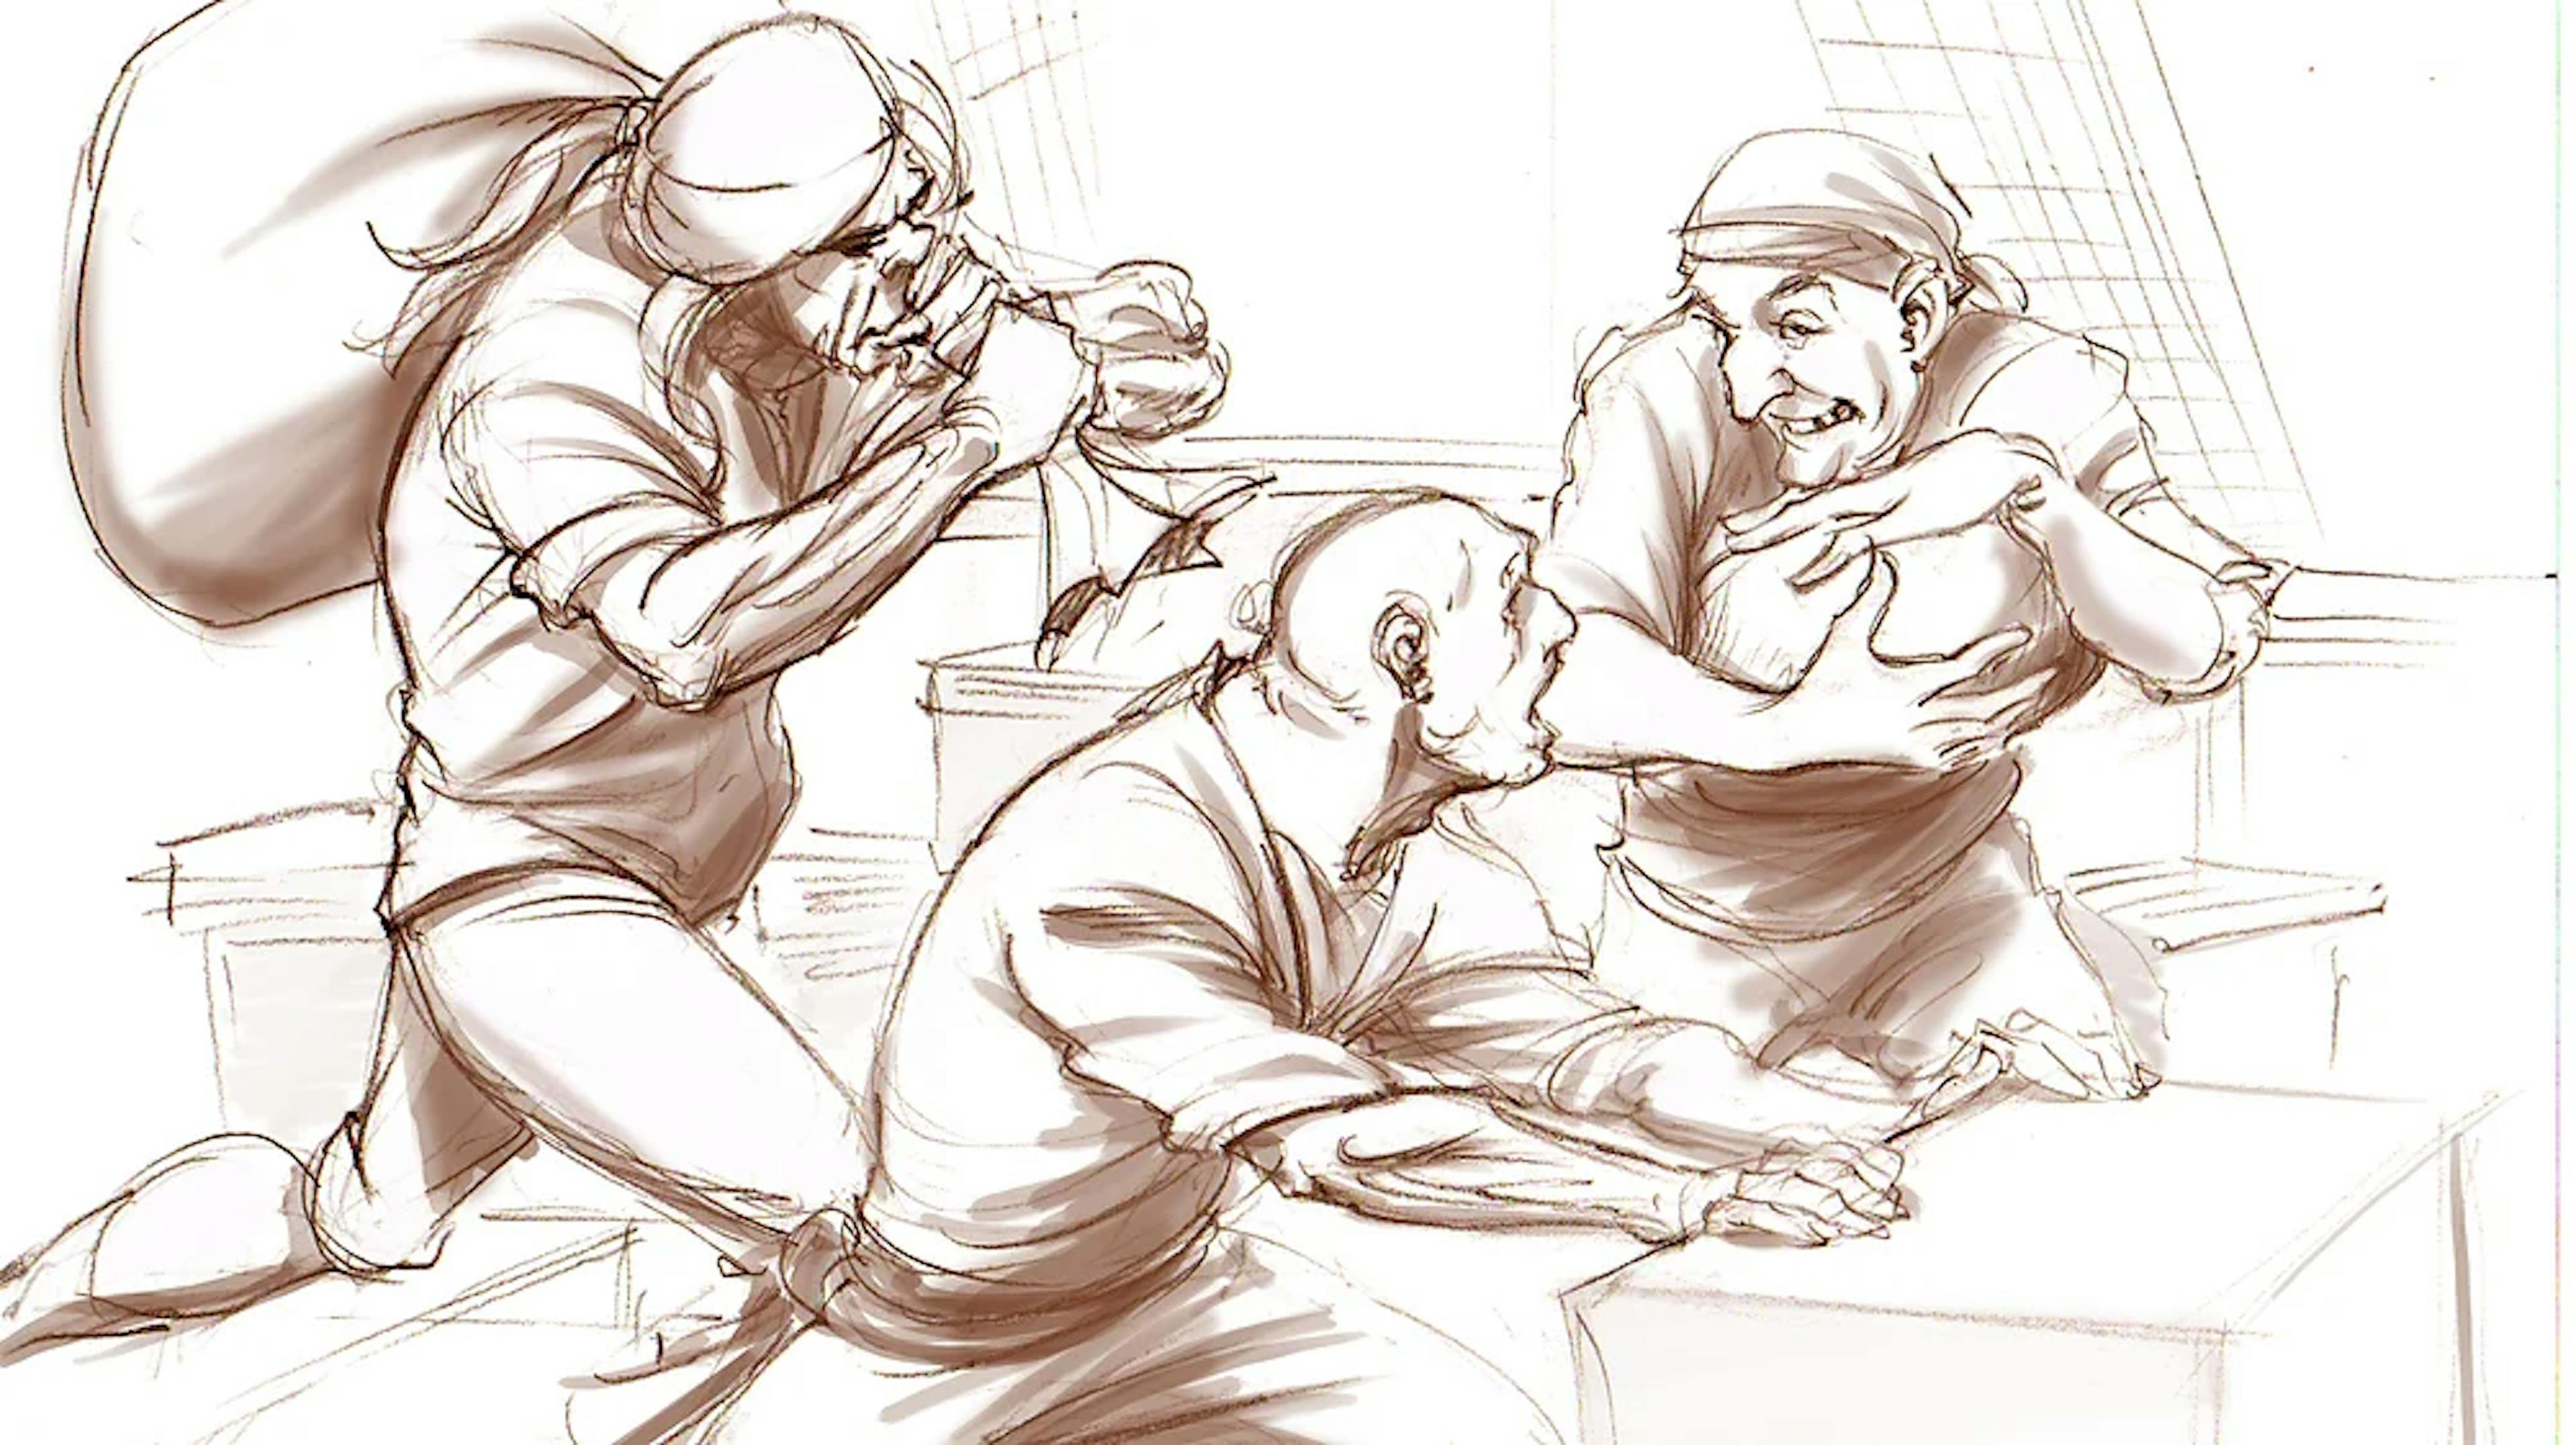 Sketch of pirates working